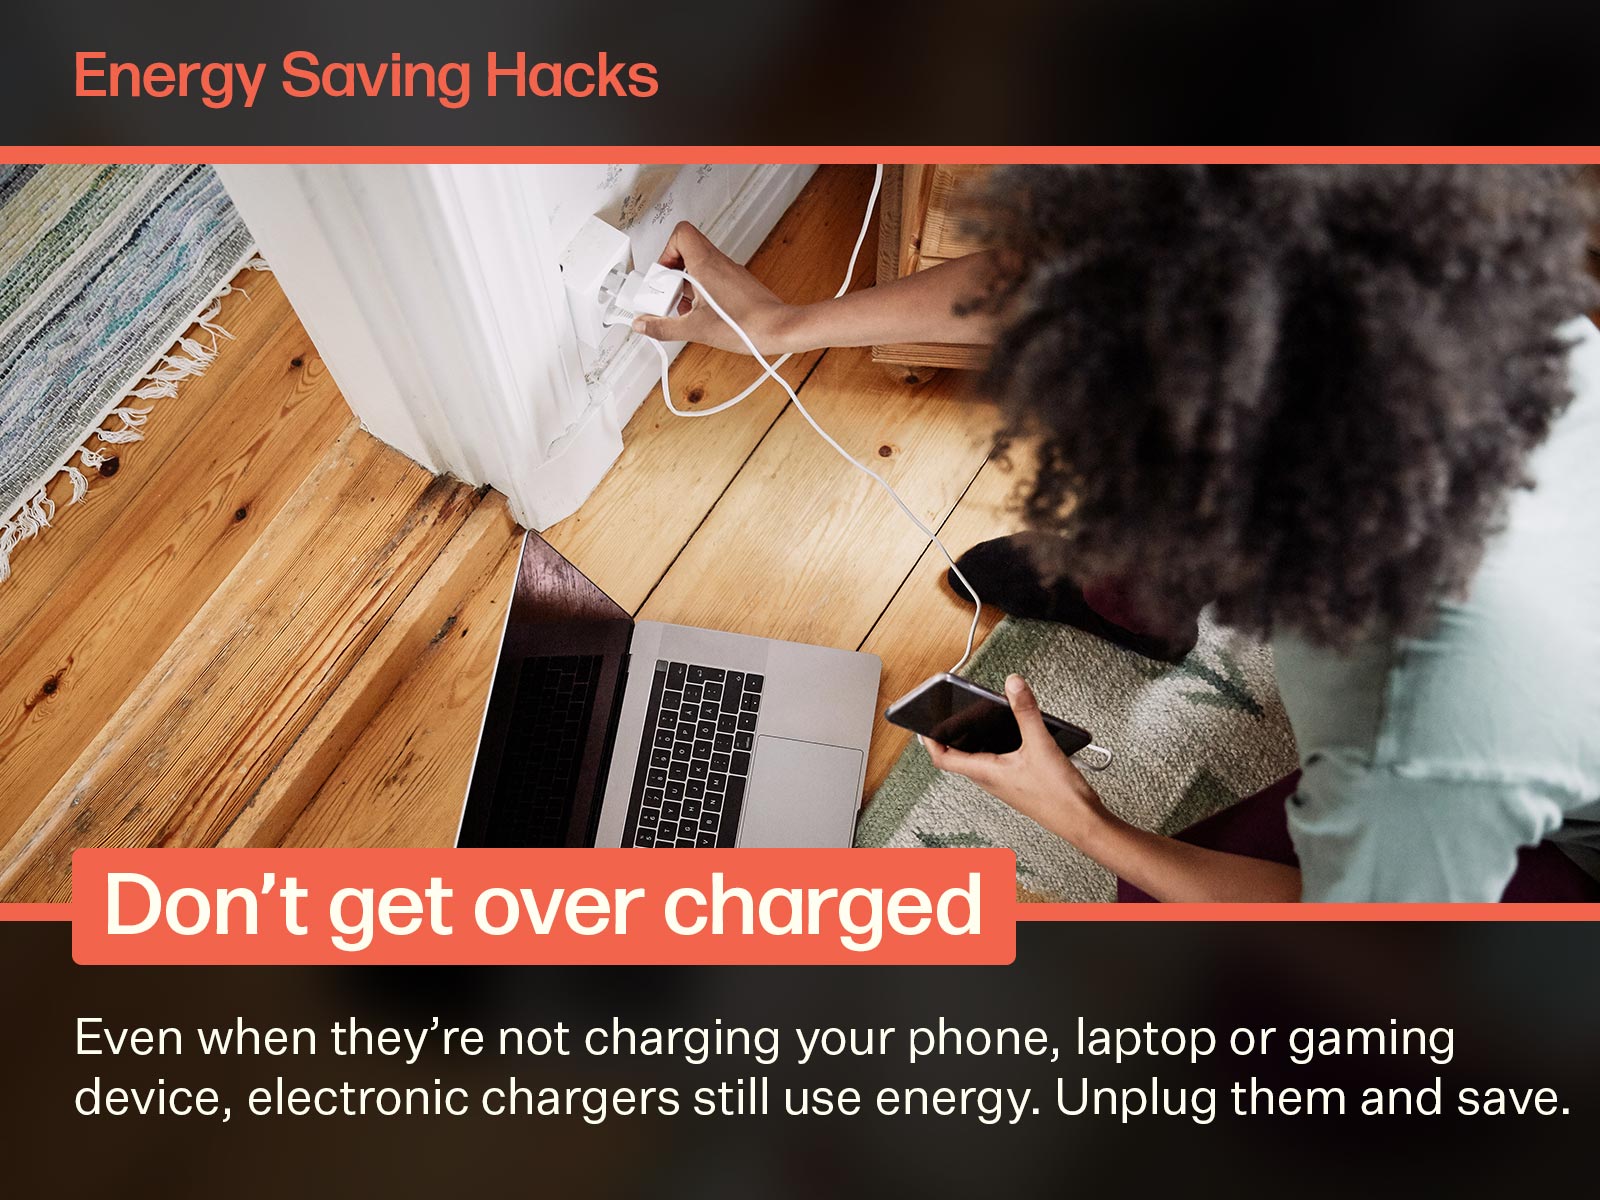 To save energy, unplug devices when they aren't in use. Image on text says: Energy Saving Hacks. Don't get over charged. Even when they're not charging your phone, laptop or gaming device, electronic chargers still use energy. Unplug them and save.